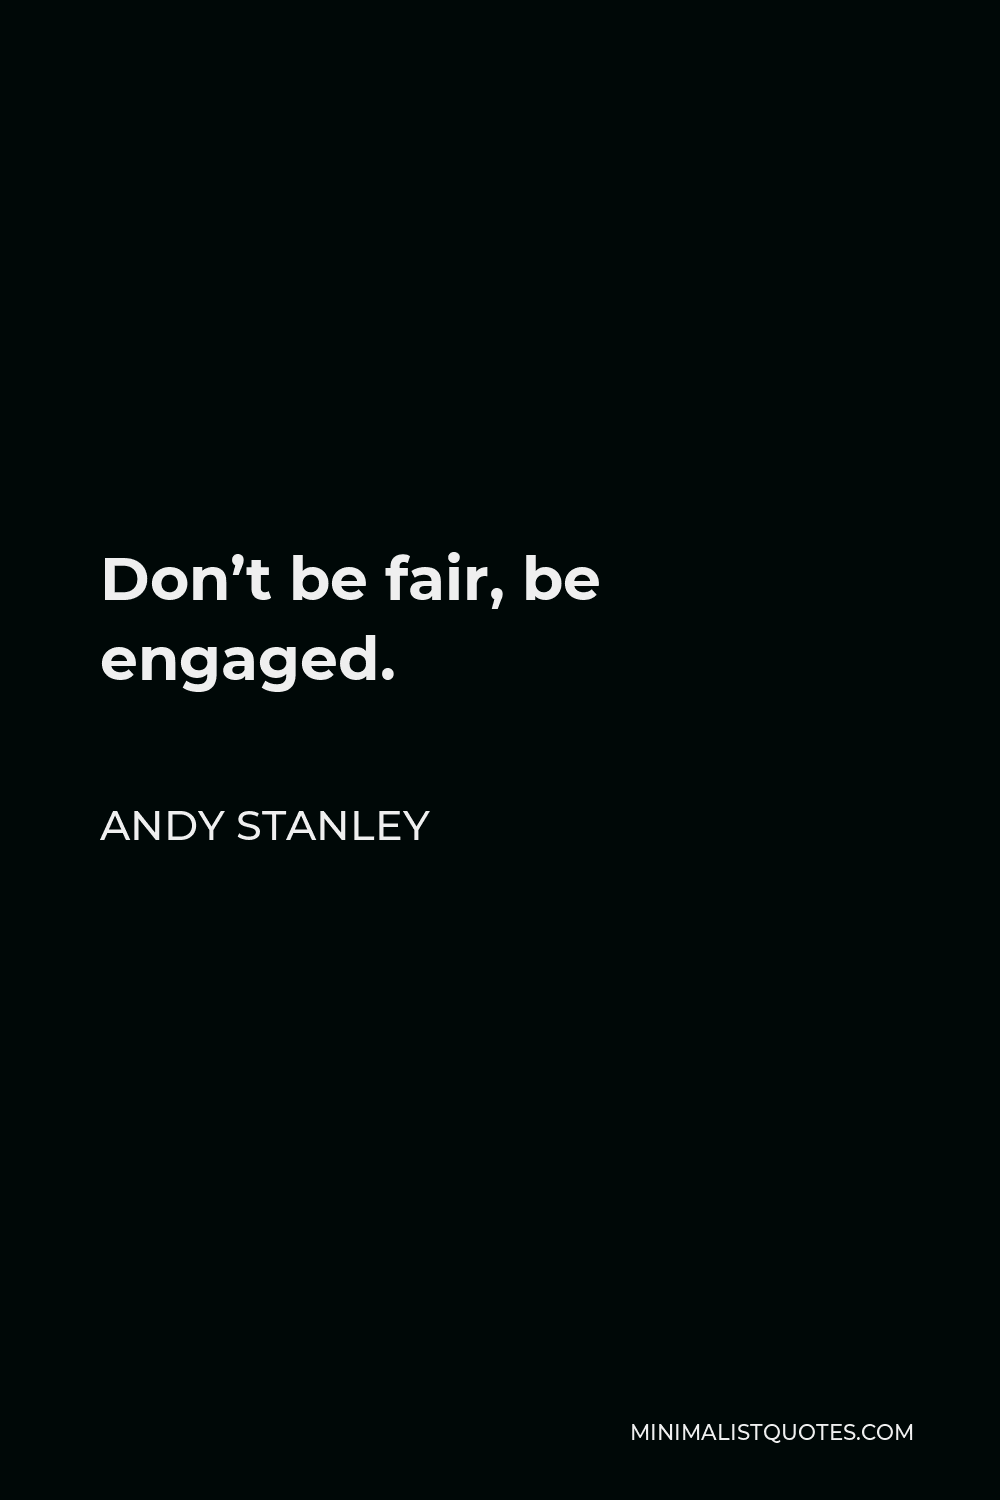 Andy Stanley Quote - Don’t be fair, be engaged.